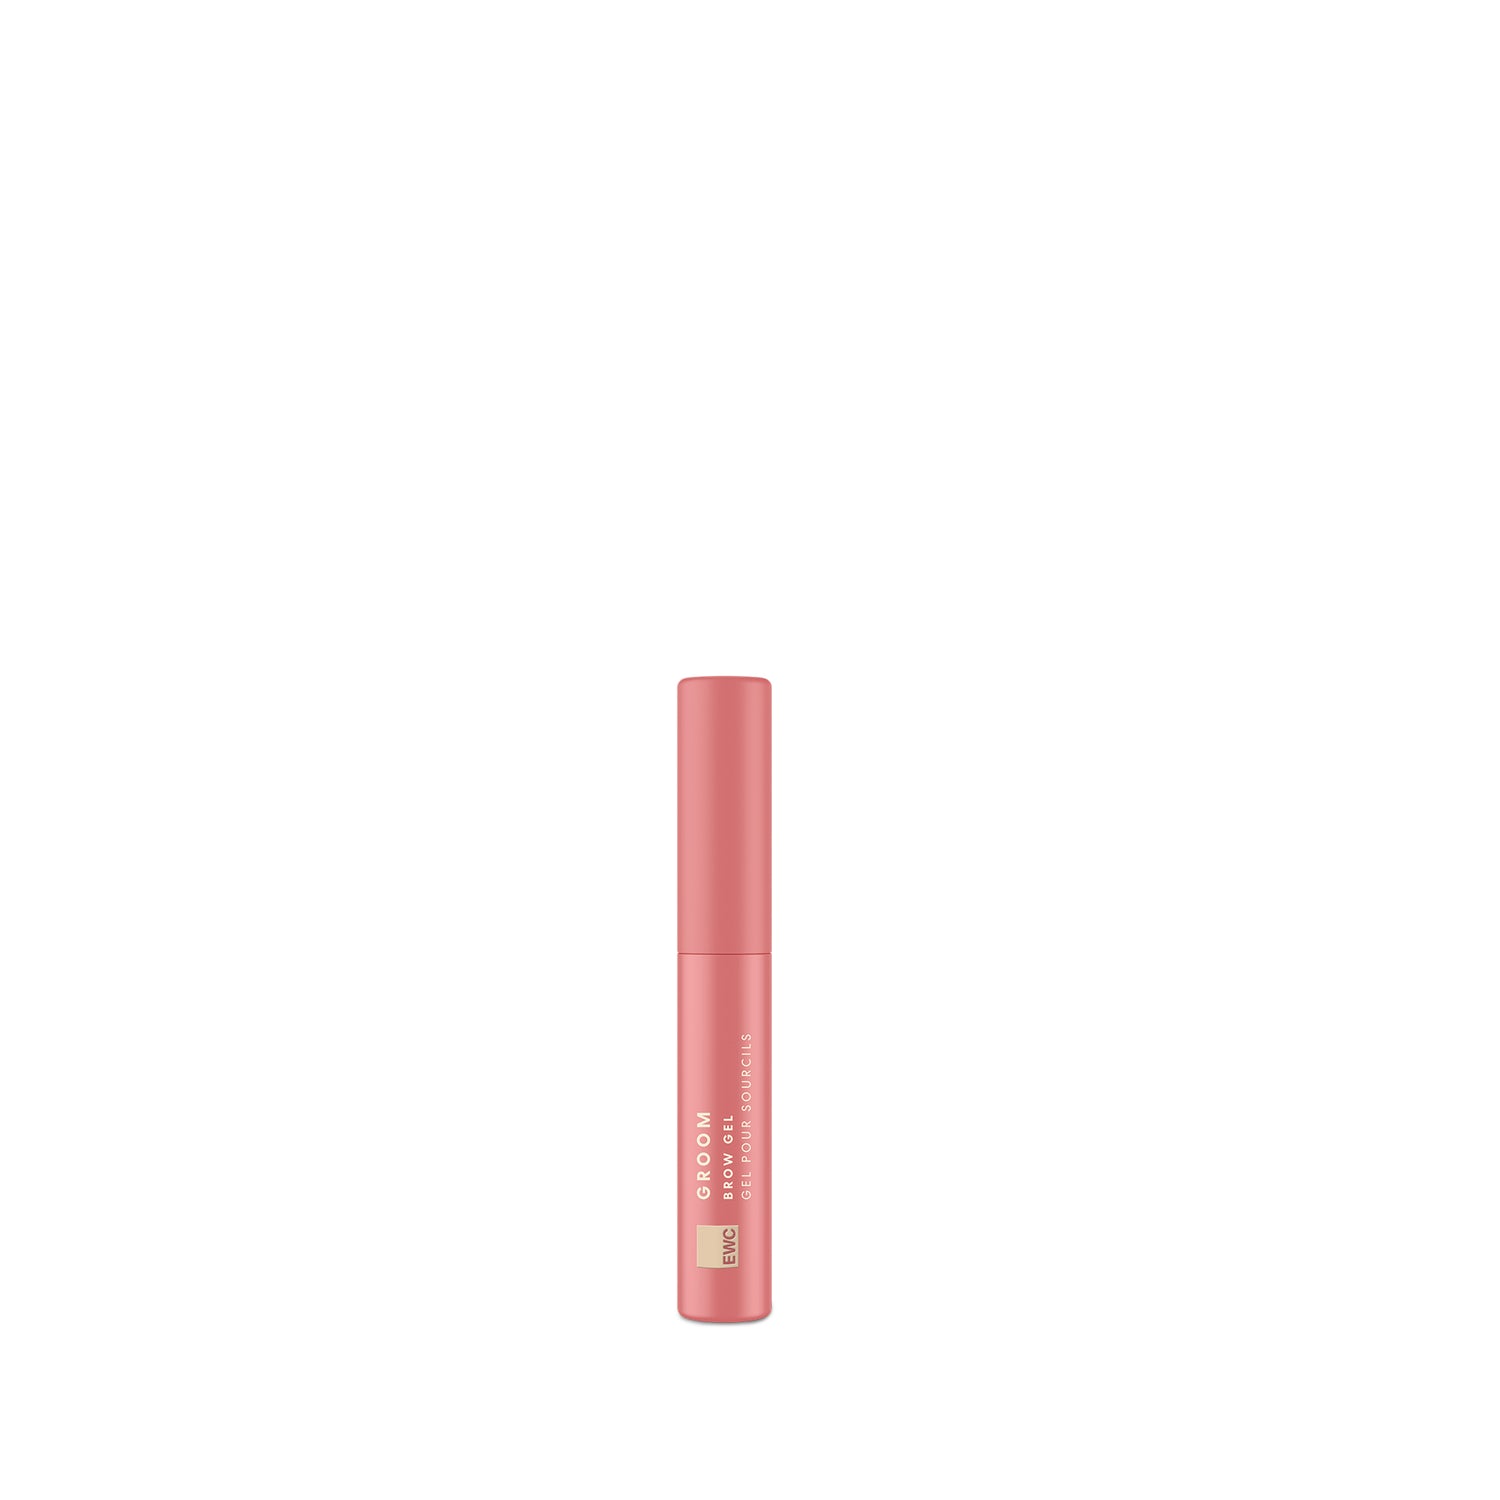 European Wax Center pink tube of Groom Brow Gel on white background